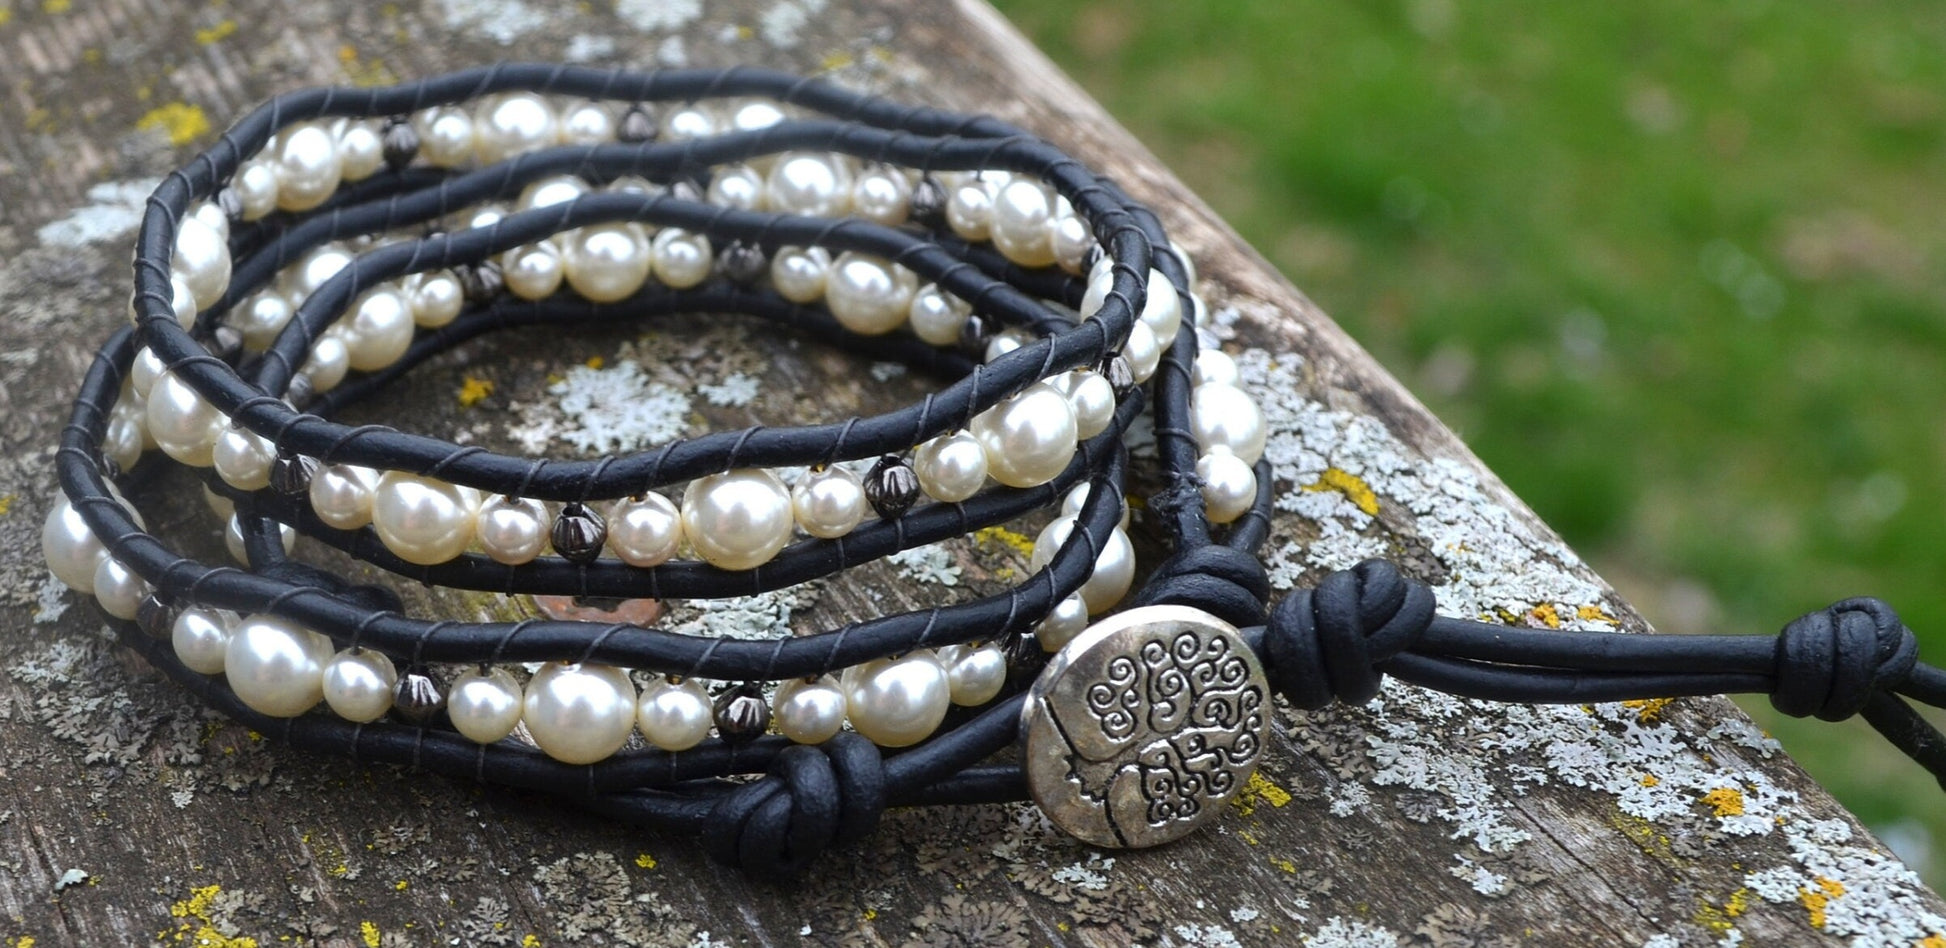 Beaded 3 Wrap Bracelet Pearls And Gunmetal On Leather